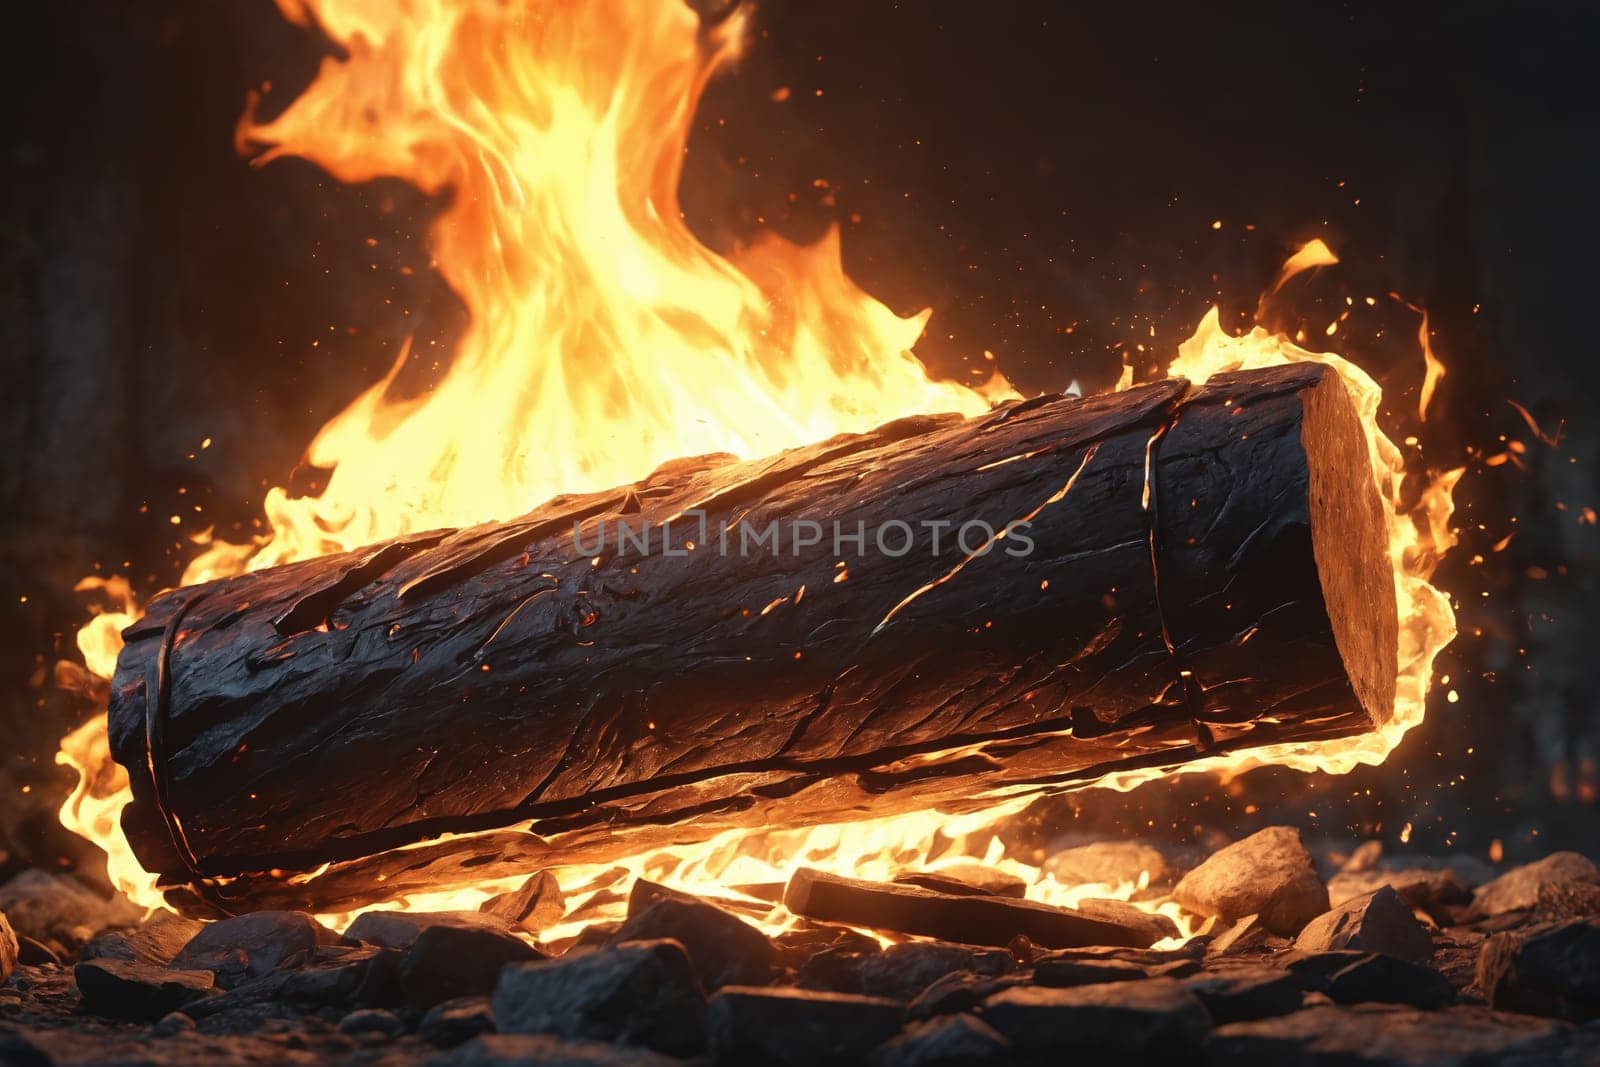 A vivid 3D scene captures the essence of a wood fire at night, with sparks scattering into the dark sky.